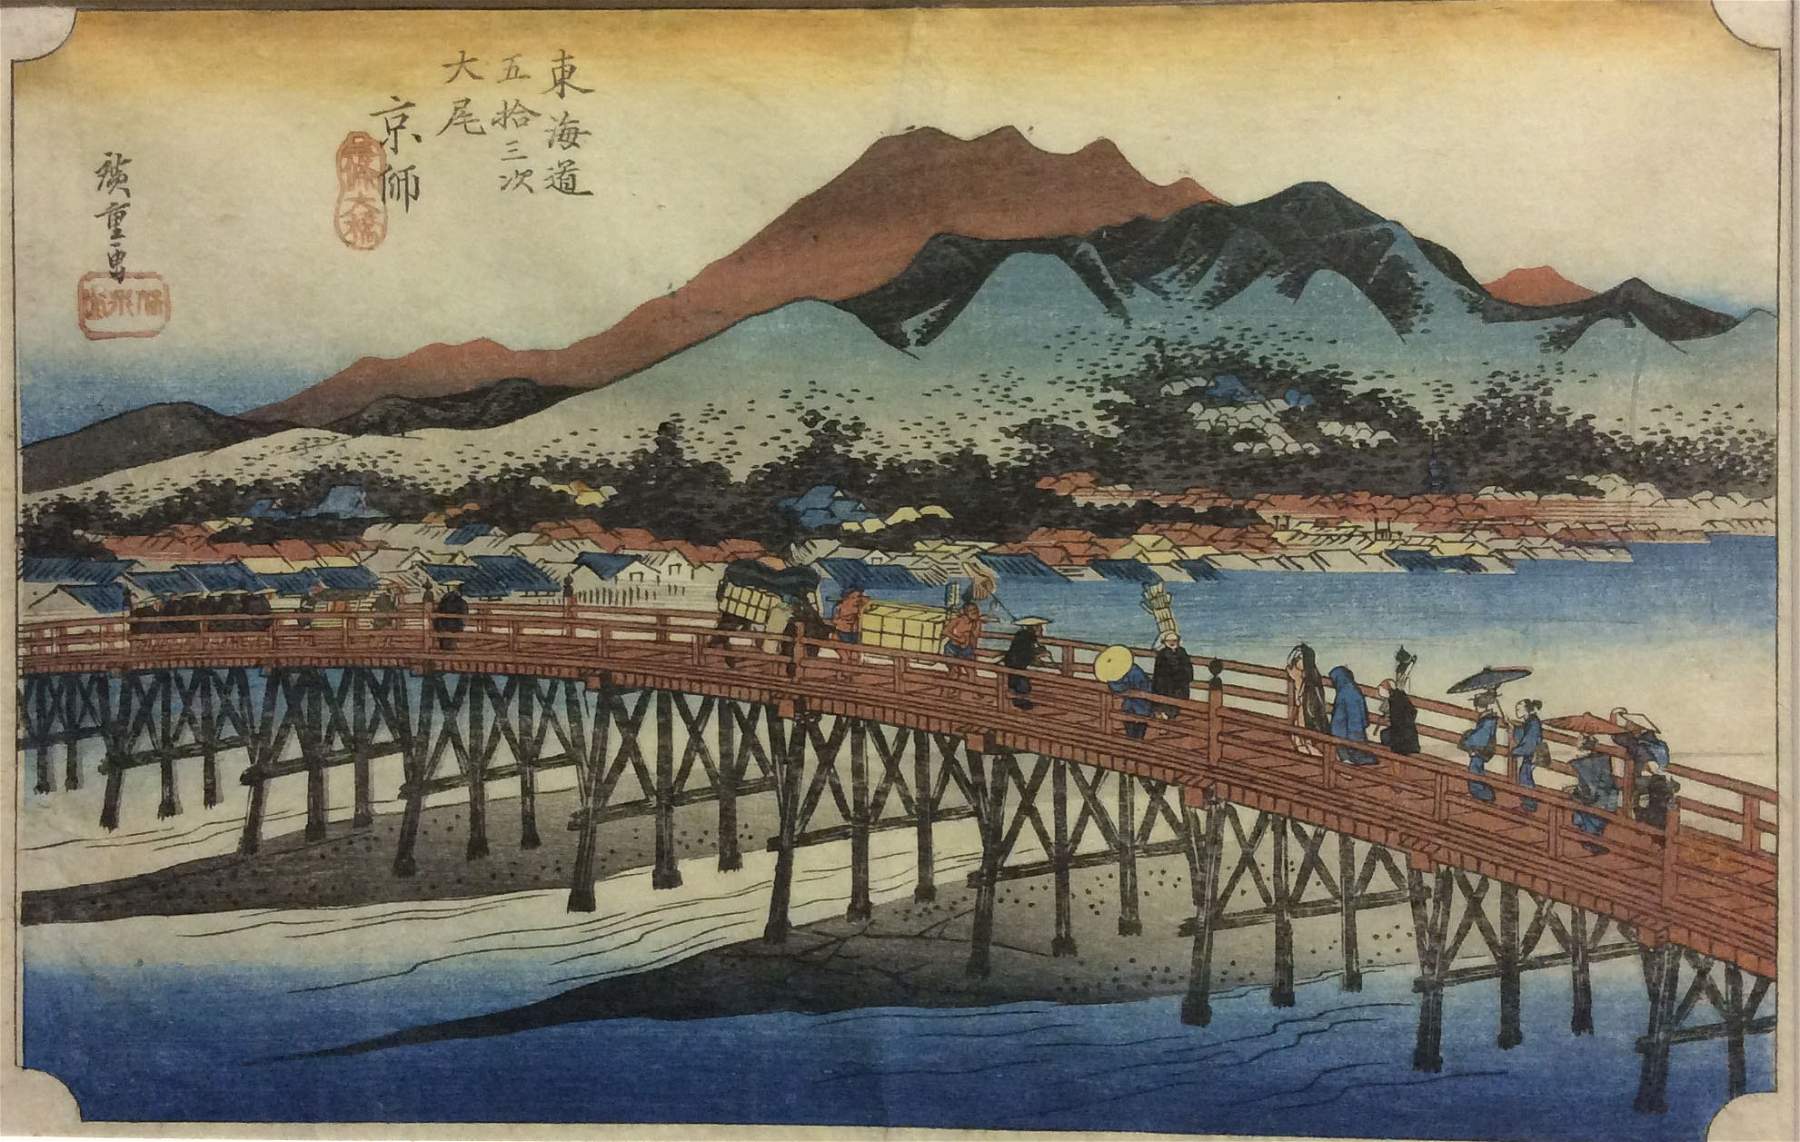 From Hokusai to Hiroshige, in Pavia the masters of Japanese art compare with Gauguin, Manet and others